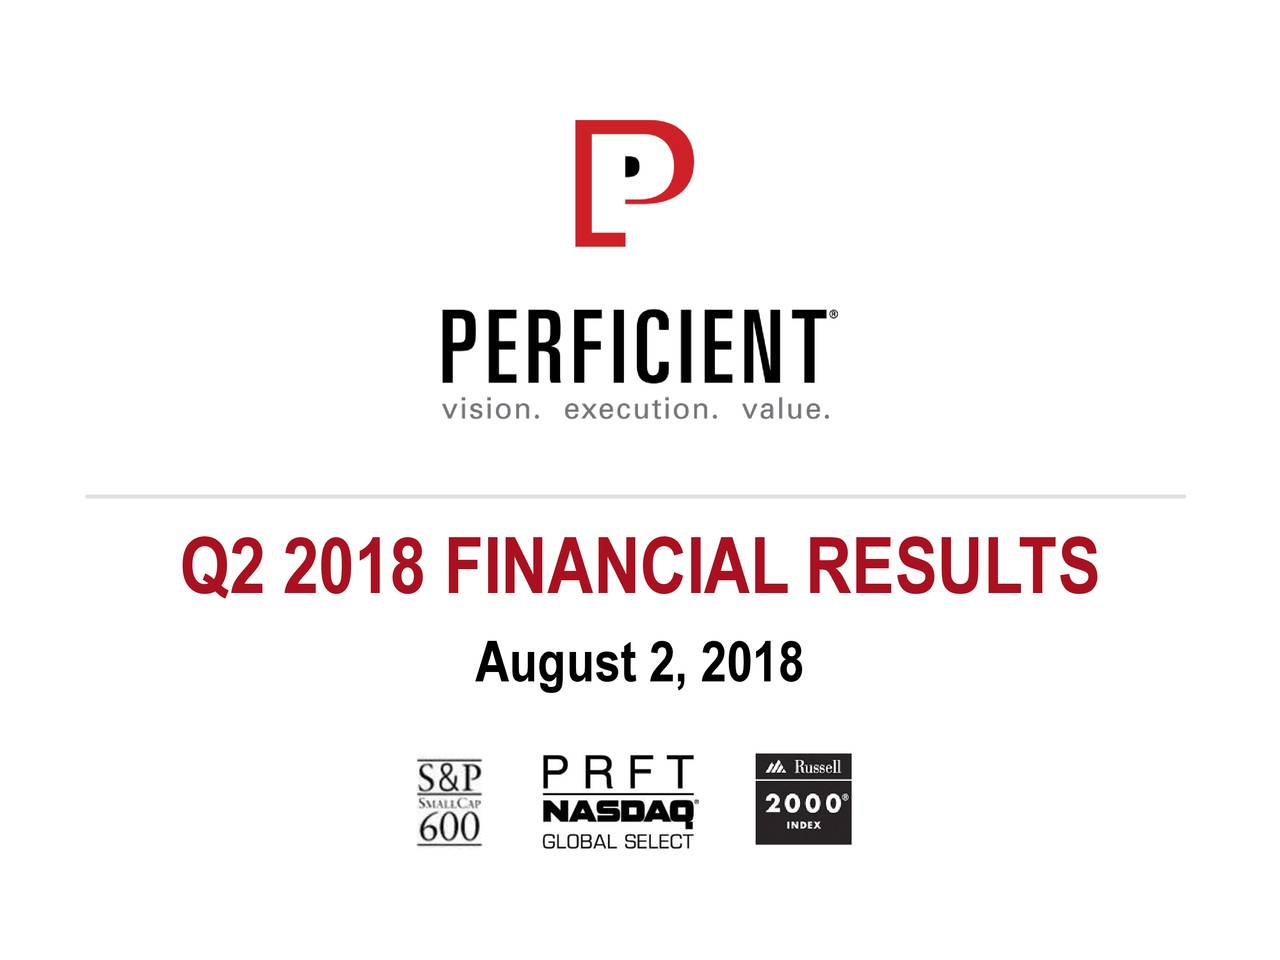 Q2 2018 FINANCIAL RESULTS